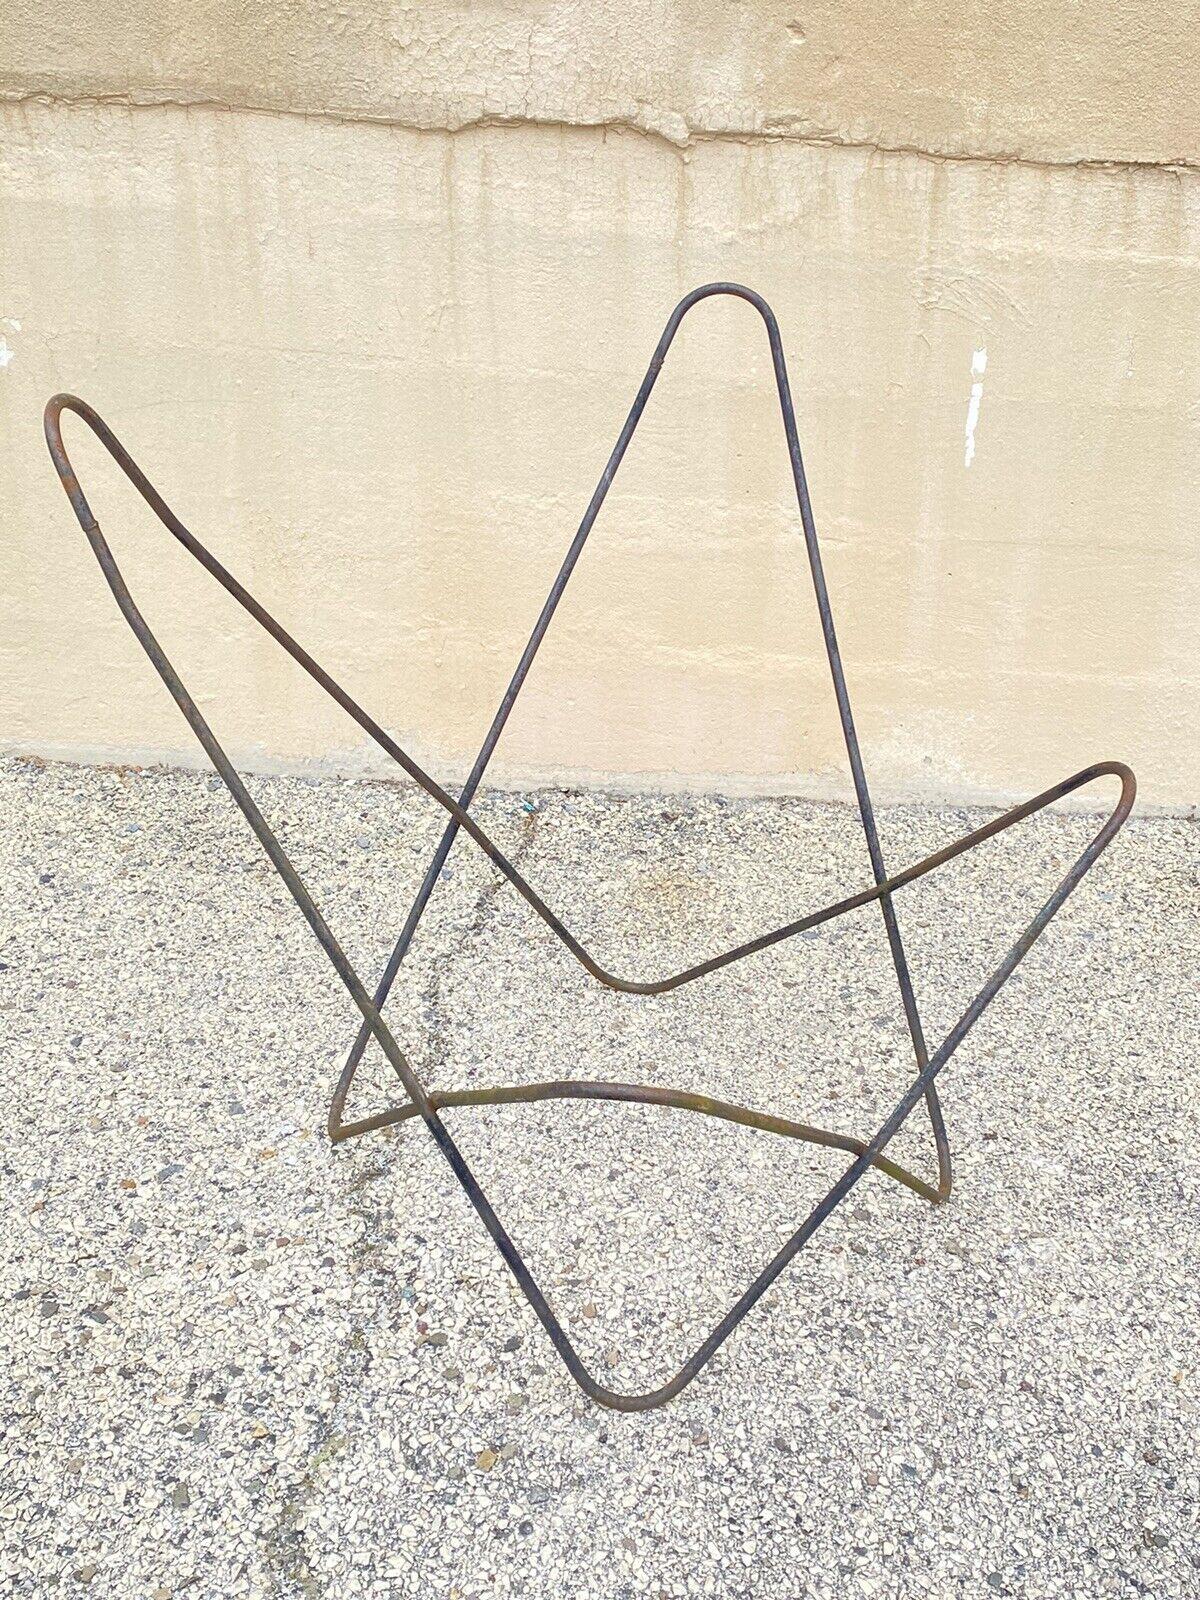 Vintage Mid Century Modern Wrought Iron Butterfly Sling Lounge Chair Frame (no seat). Circa Mid 20th Century. Measurements: 32